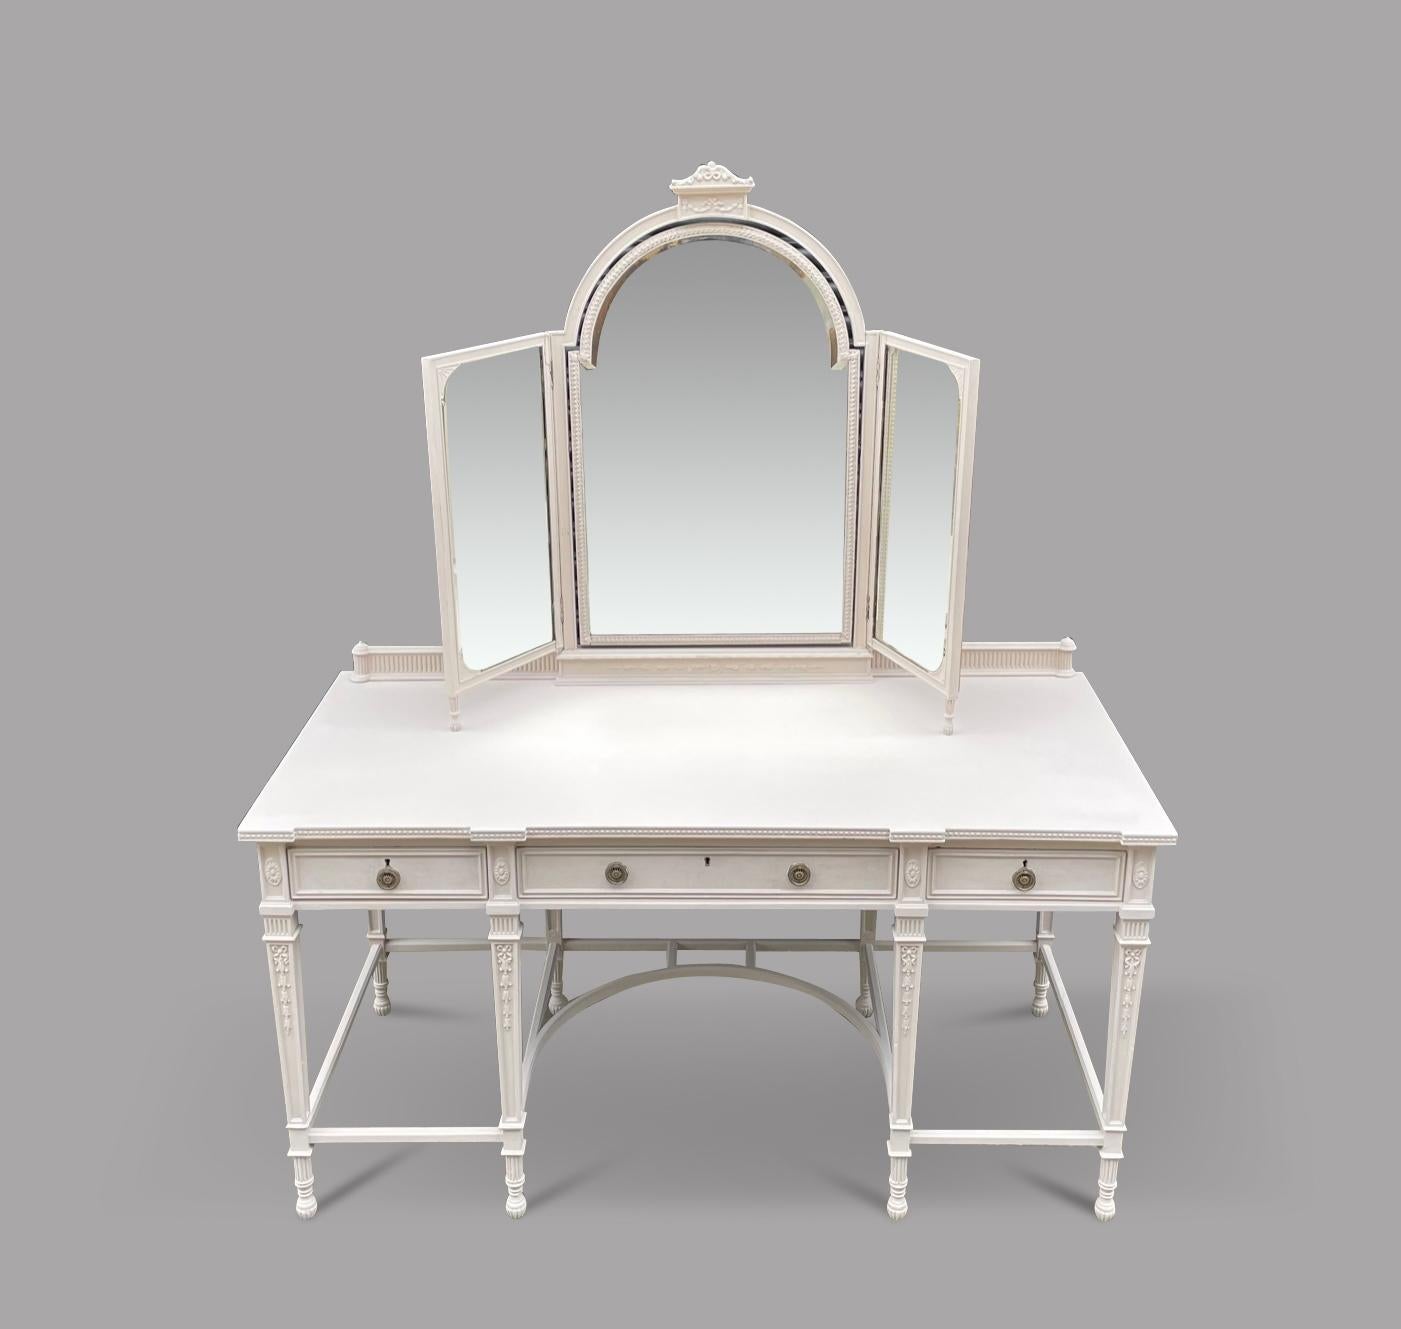 An Attractive Edwardian painted mahogany dressing table in the manner of Robert Adam with a triptych mirror upper section in a butterscotch colour. Top piece with mirror is separate piece

Height 180cm, Width 152 cm and Depth 70 cm

Provenance